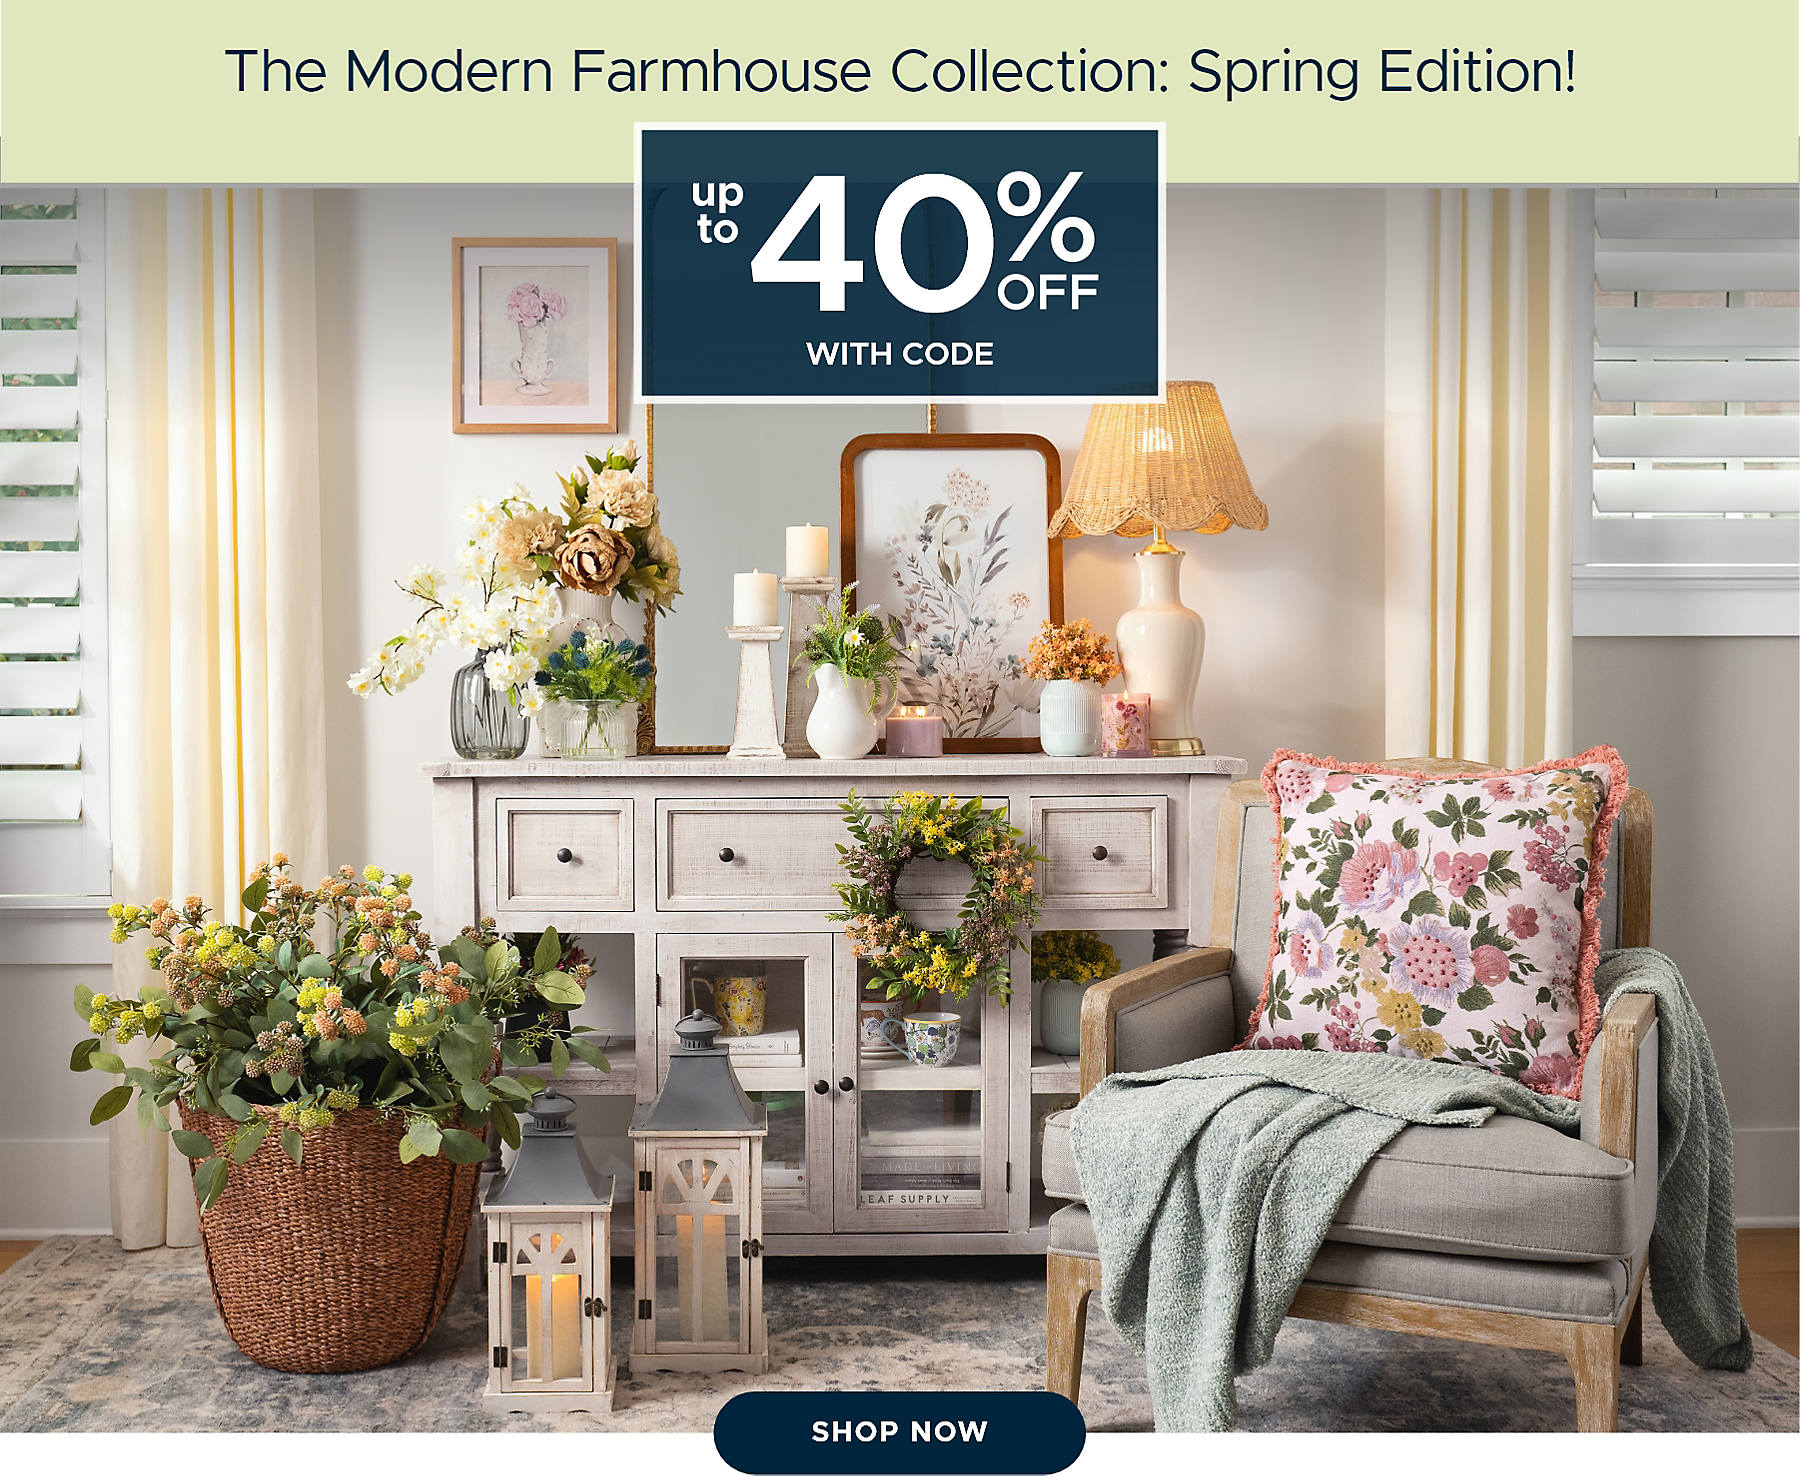 The Modern Farmhouse Collection: Spring Edition! up to 40% off with code shop now